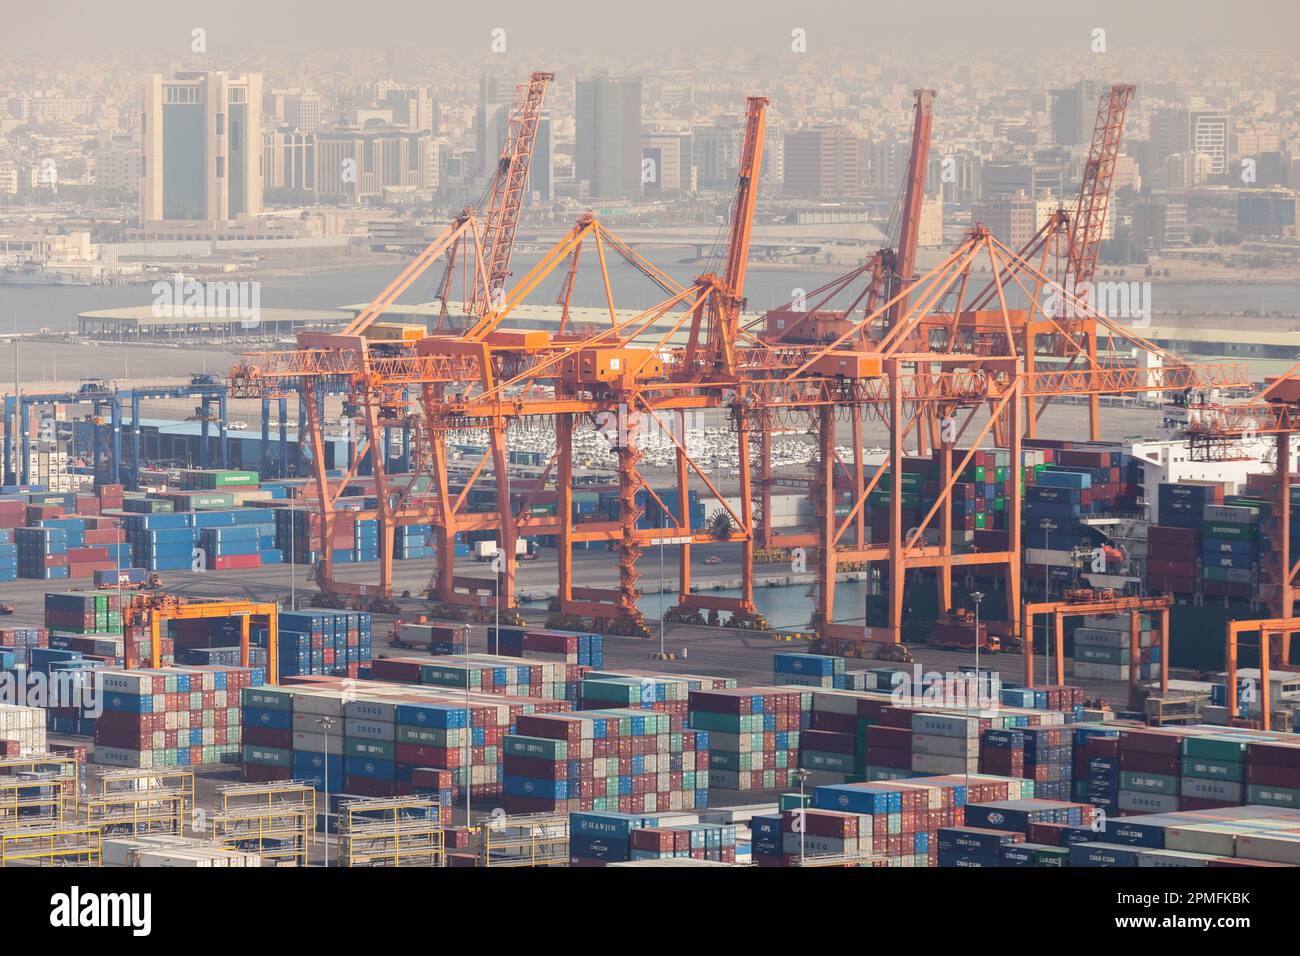 Jeddah, Saudi Arabia - December 22, 2019: Gantry cranes and stacked containers at Jeddah Islamic Seaport Stock Photo